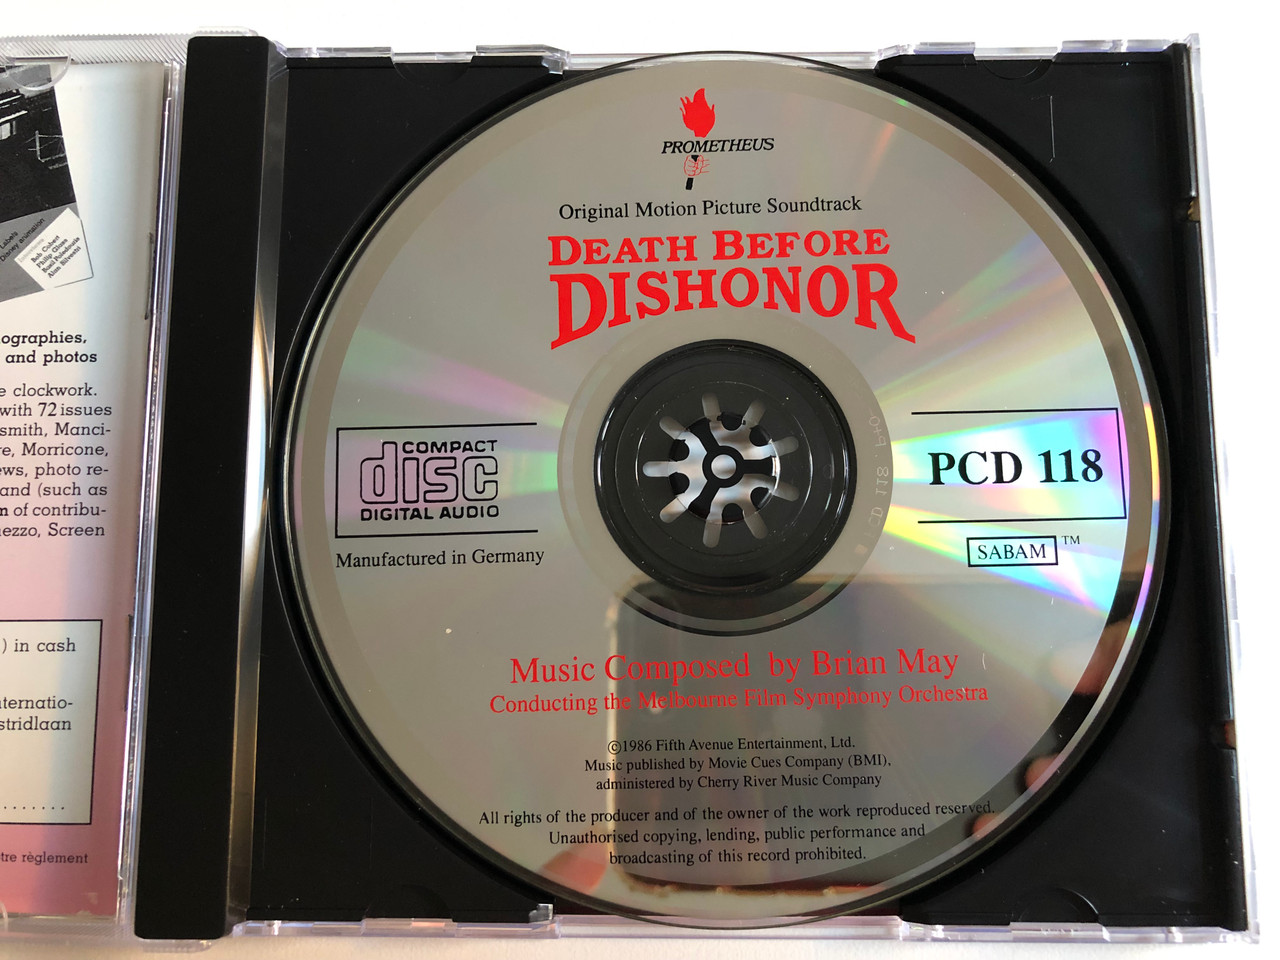 https://cdn10.bigcommerce.com/s-62bdpkt7pb/products/0/images/197496/Death_Before_Dishonor_Original_Motion_Picture_Soundtrack_-_Music_Composed_by_Brian_May_Conducting_the_Melbouurne_Film_Symphony_Orchestra_By_The_composer_of_Mad_Max_I_and_II_Prometheus_3__86480.1635496823.1280.1280.JPG?c=2&_gl=1*7yssgo*_ga*MjA2NTIxMjE2MC4xNTkwNTEyNTMy*_ga_WS2VZYPC6G*MTYzNTQ5NjQyMS4xNDYuMS4xNjM1NDk2NDUwLjMx